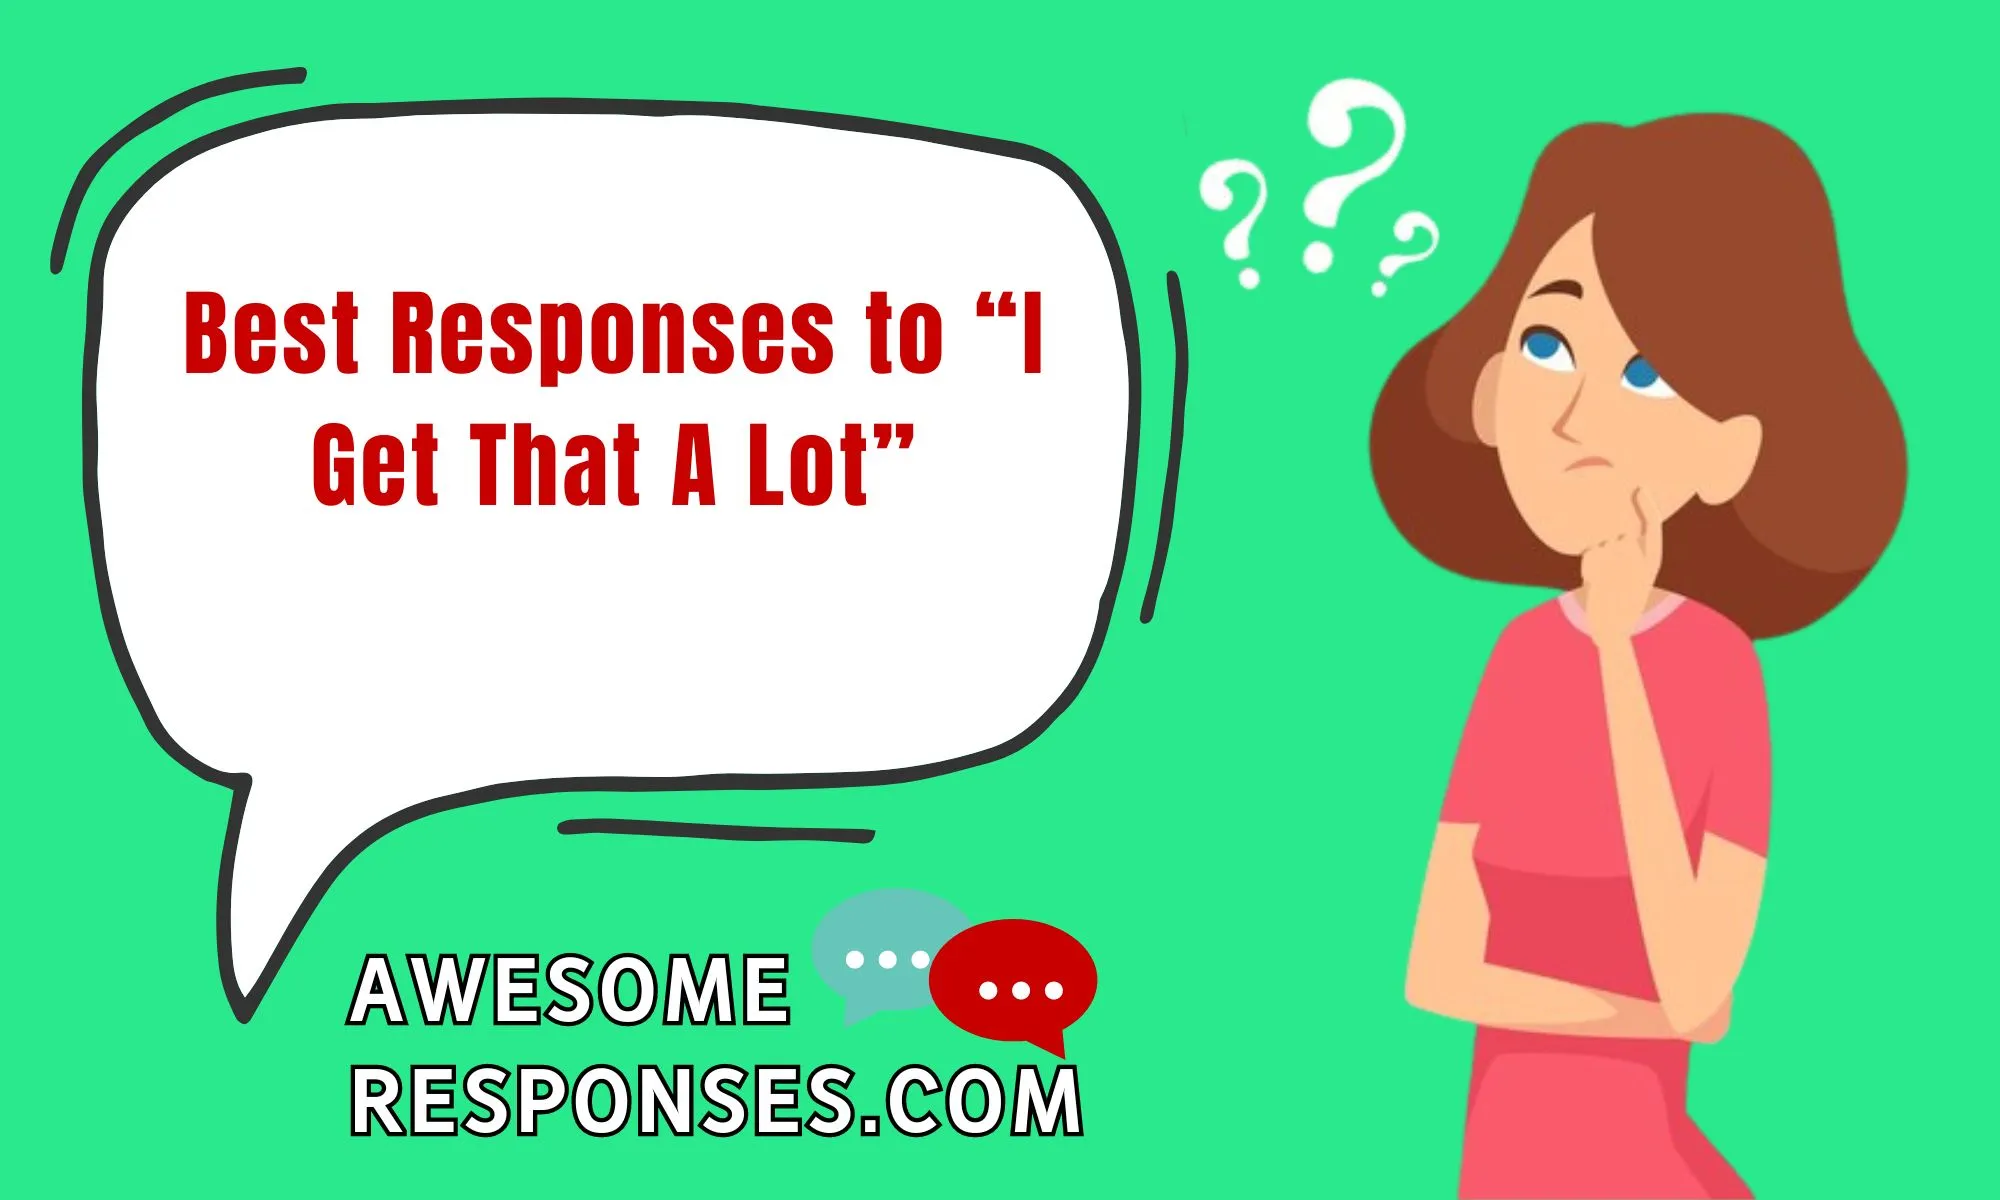 Best Responses to “I Get That A Lot”